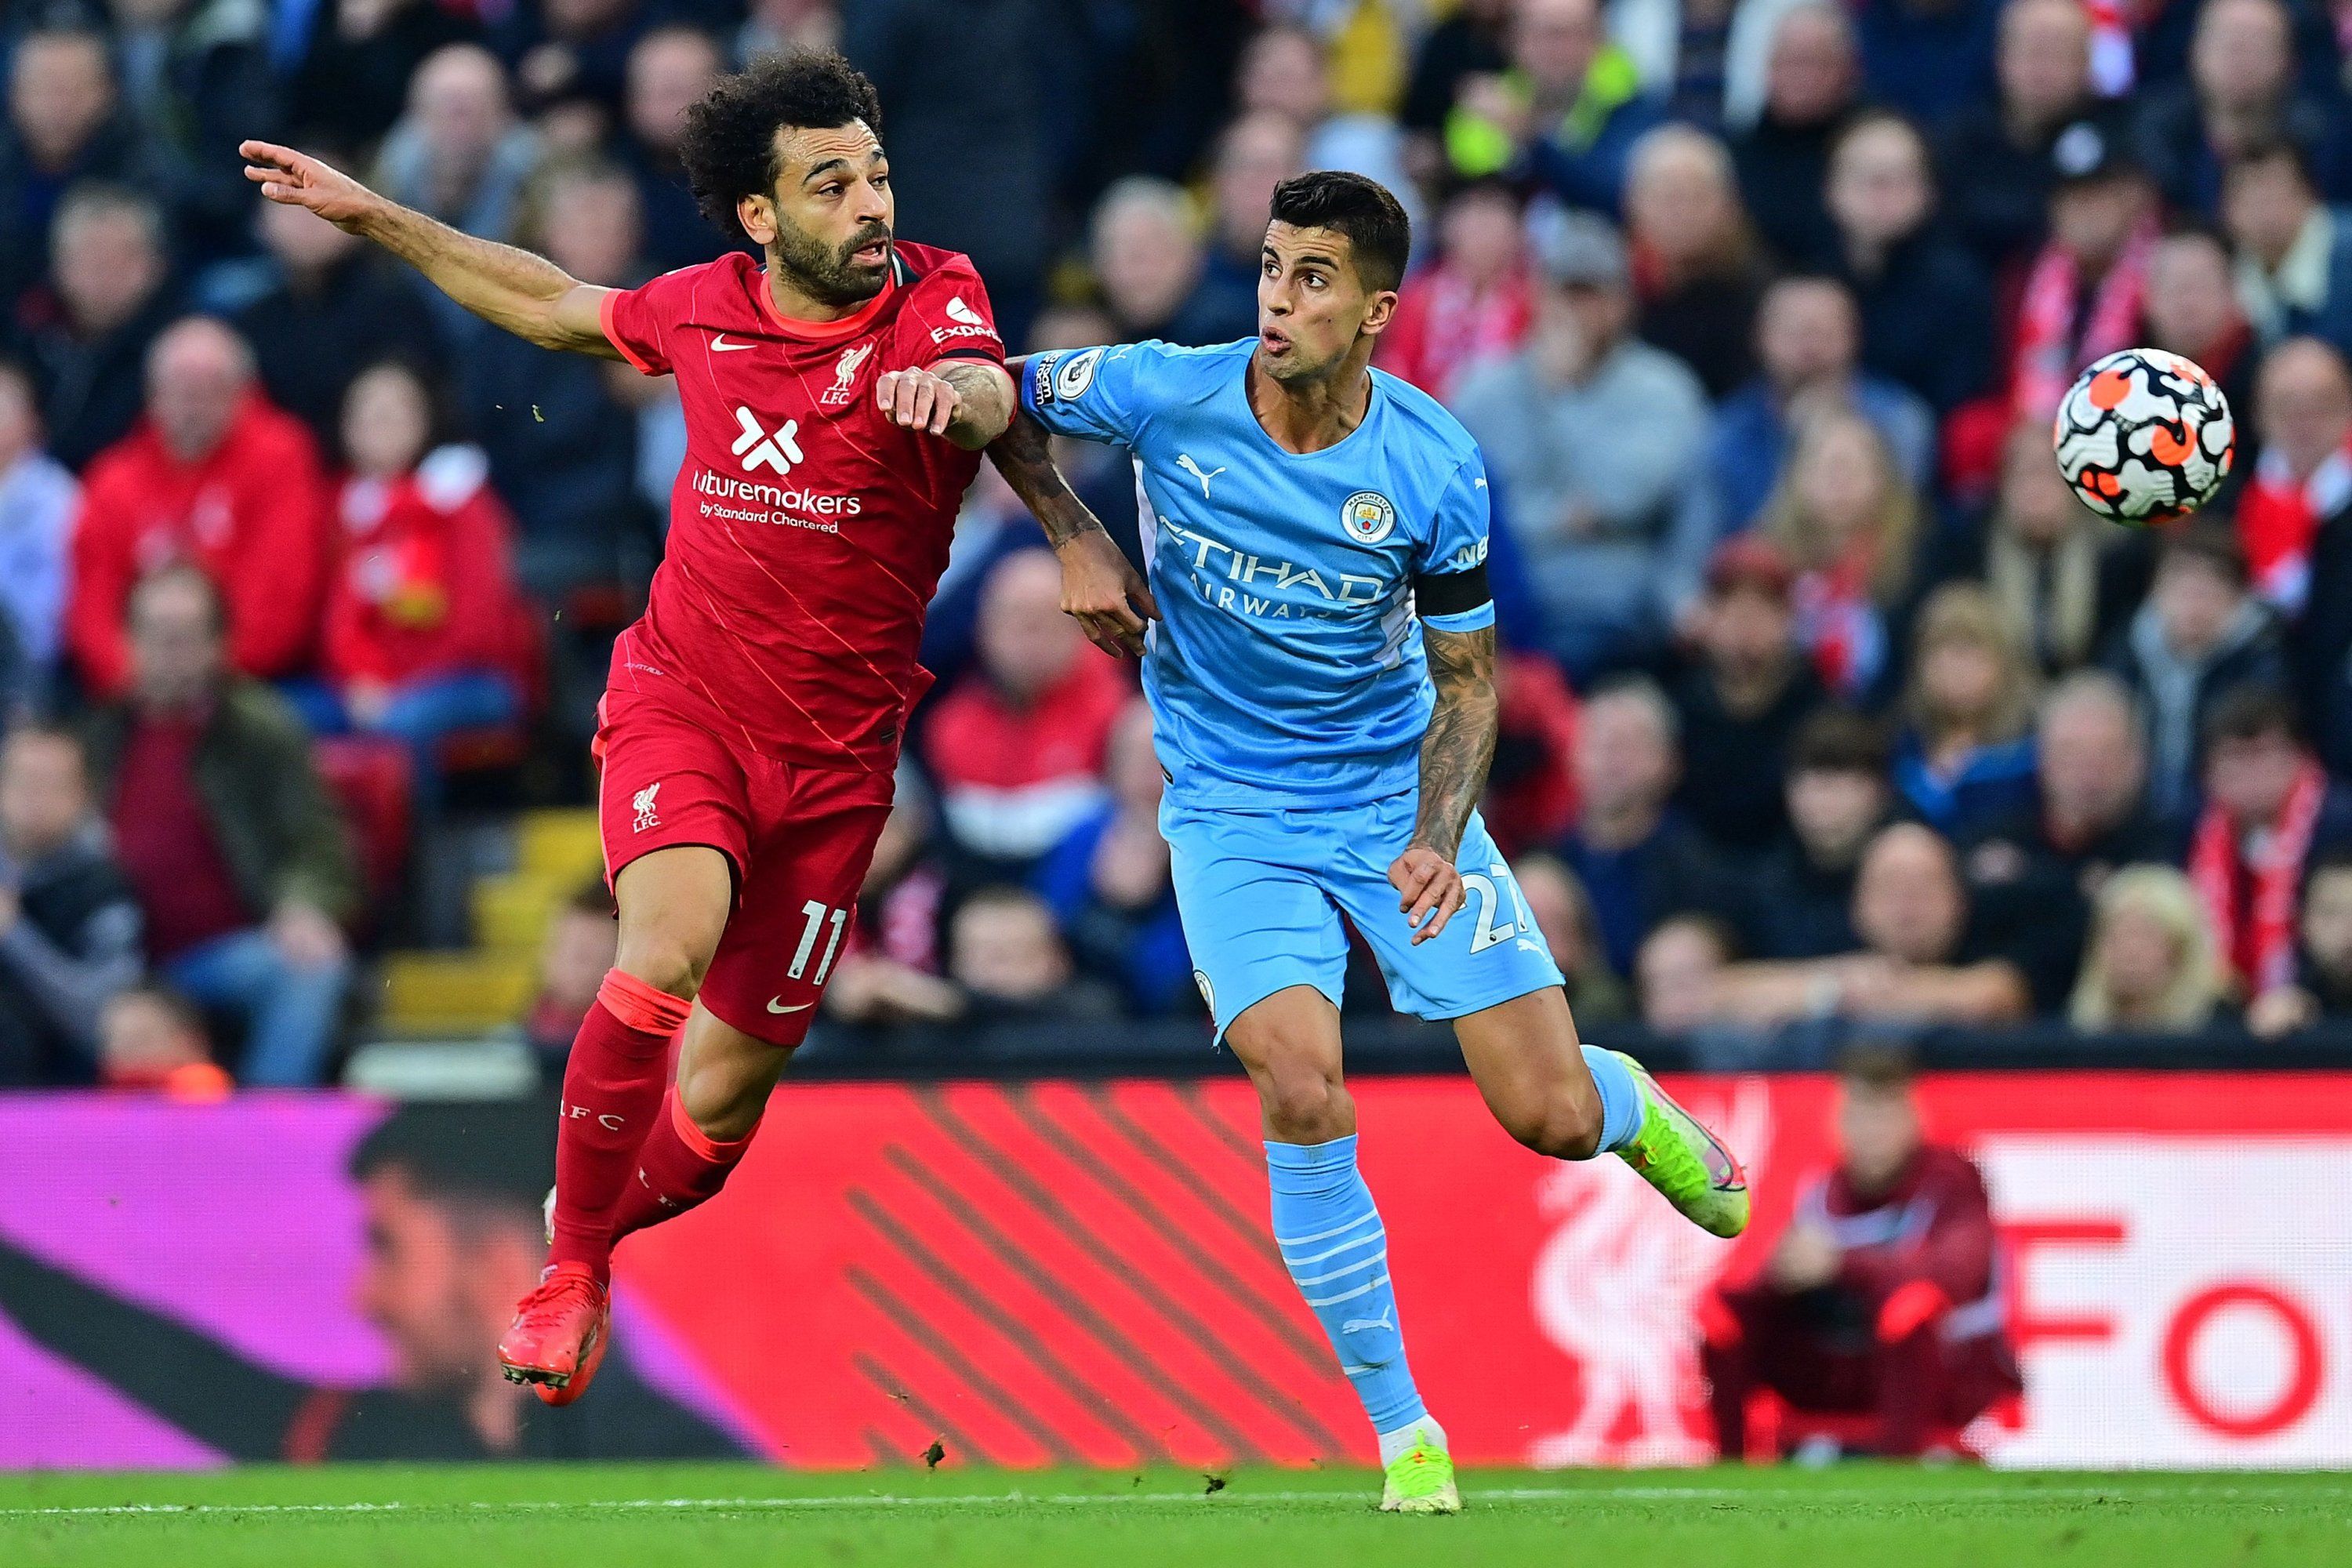 Manchester City - Liverpool Bets, Odds and Lineups for the Premier League title showdown | April 10